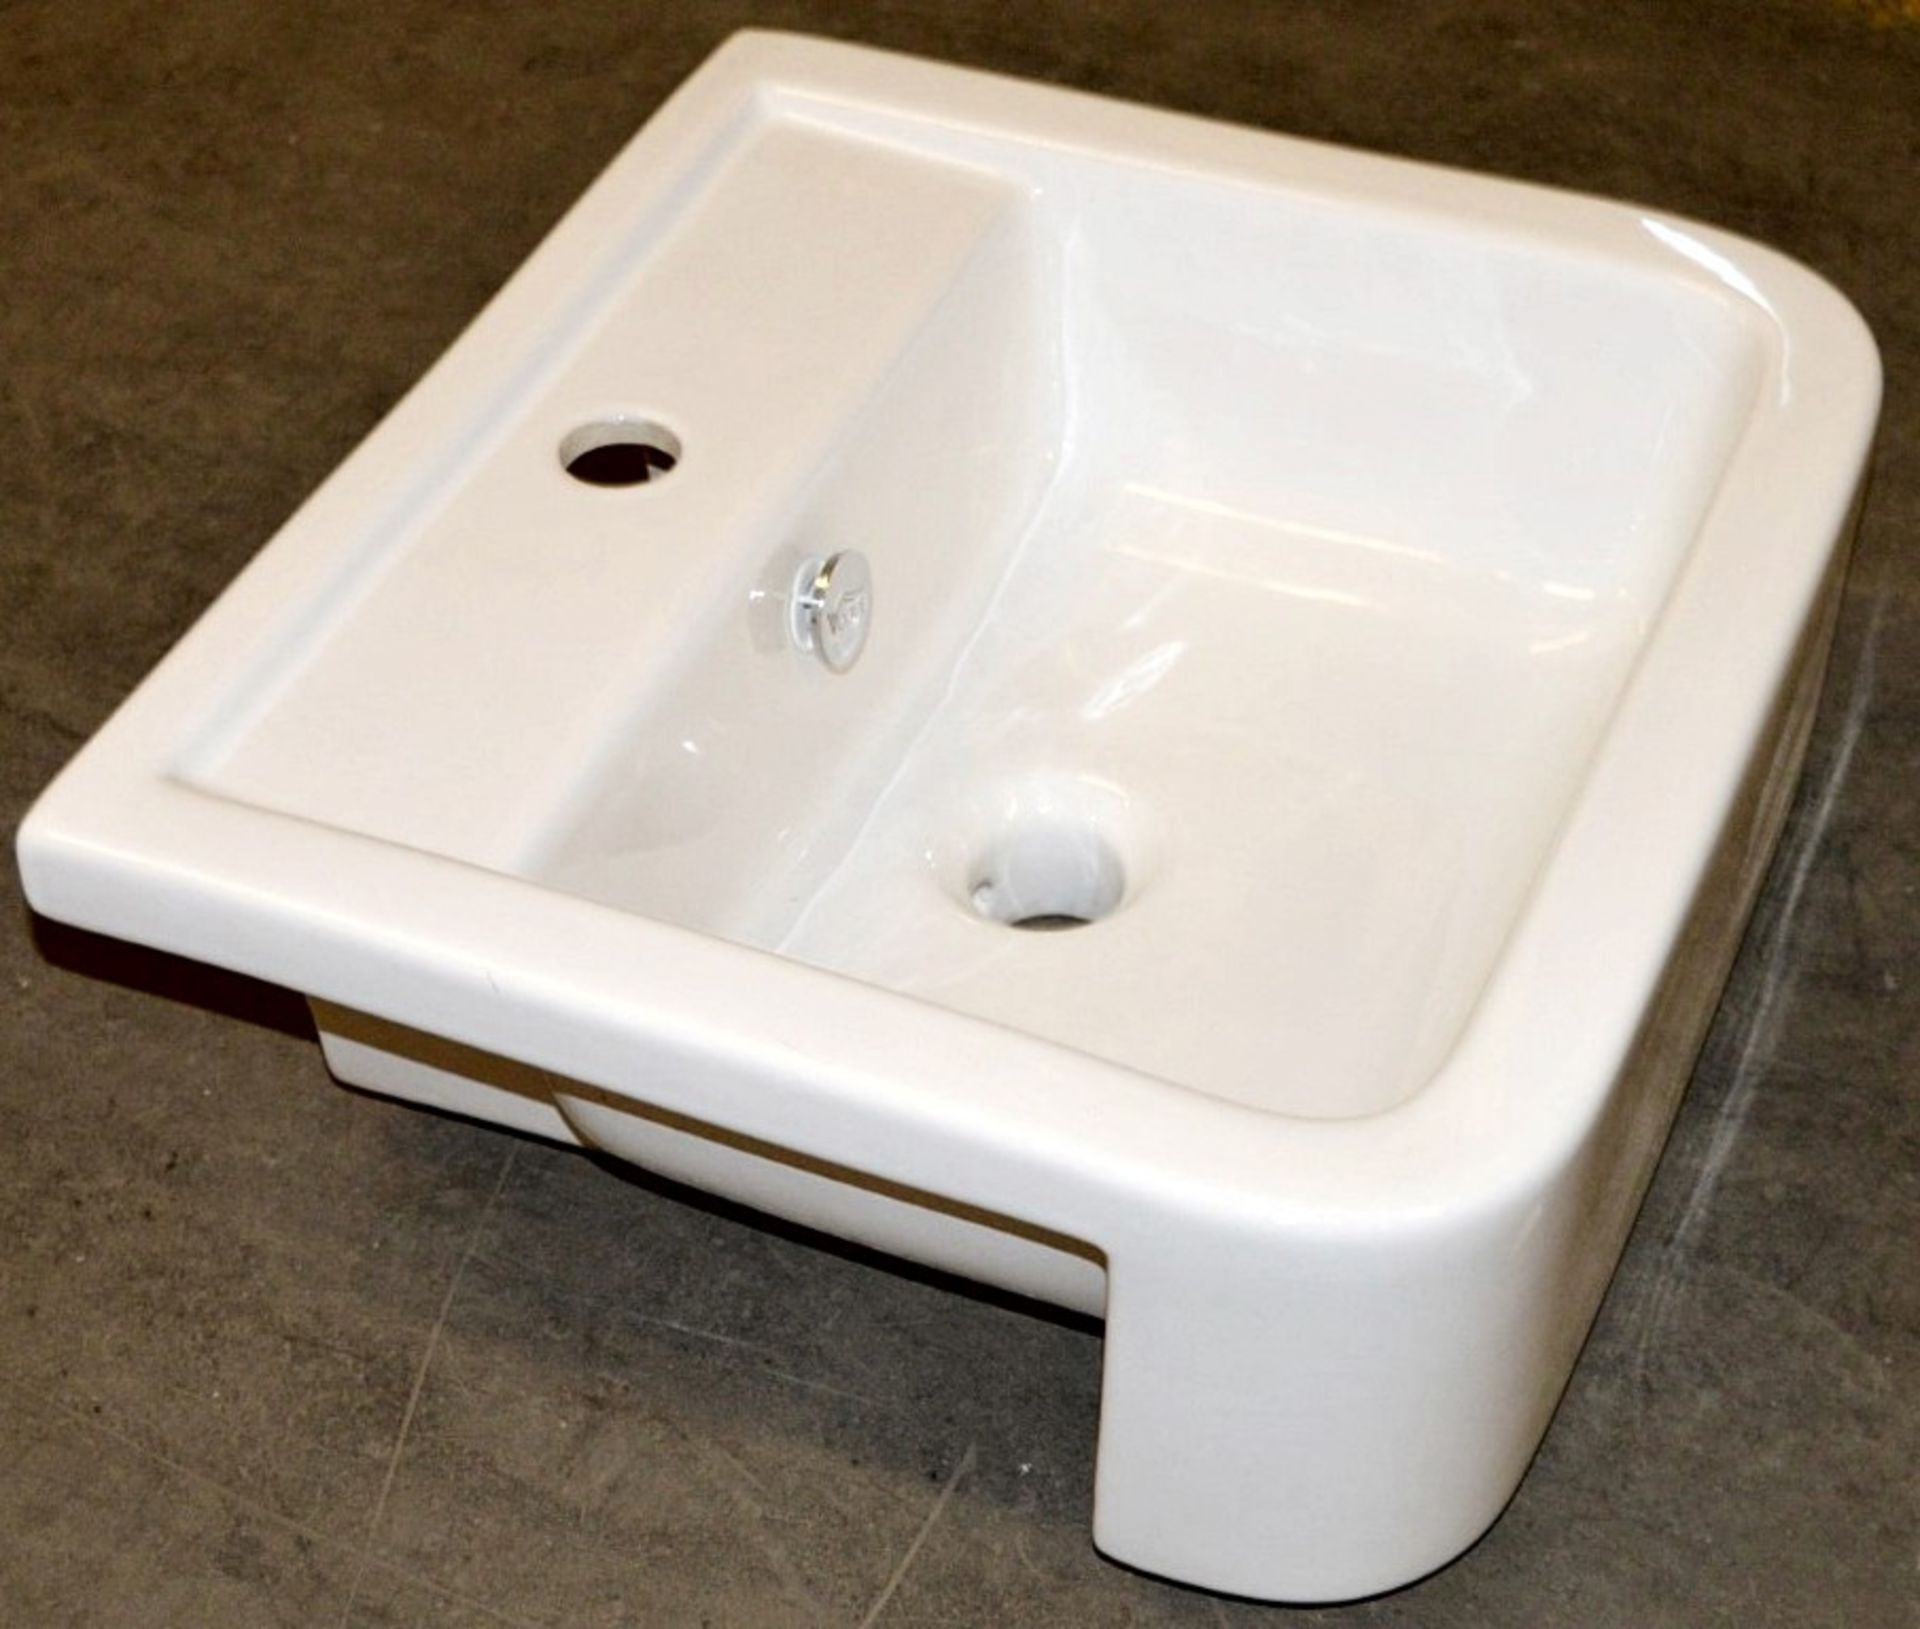 10 x Vogue Bathrooms OPTIONS Single Tap Hole SEMI RECESSED SINK BASINS - 450mm Width - Brand New - Image 5 of 5